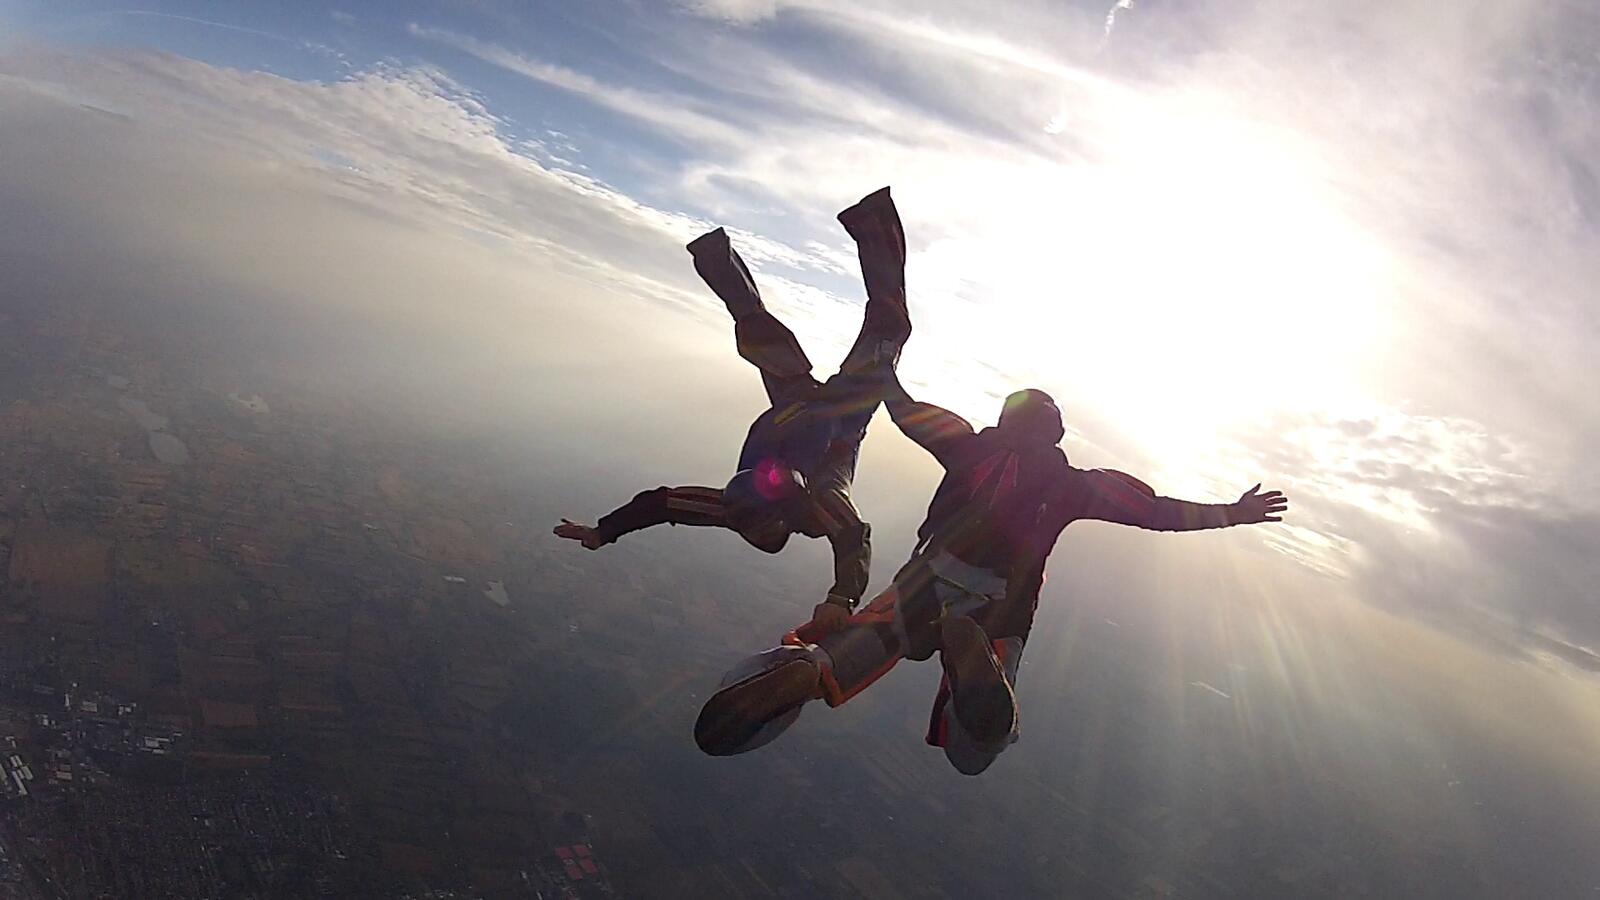 Wallpapers sky jumping extreme sport on the desktop